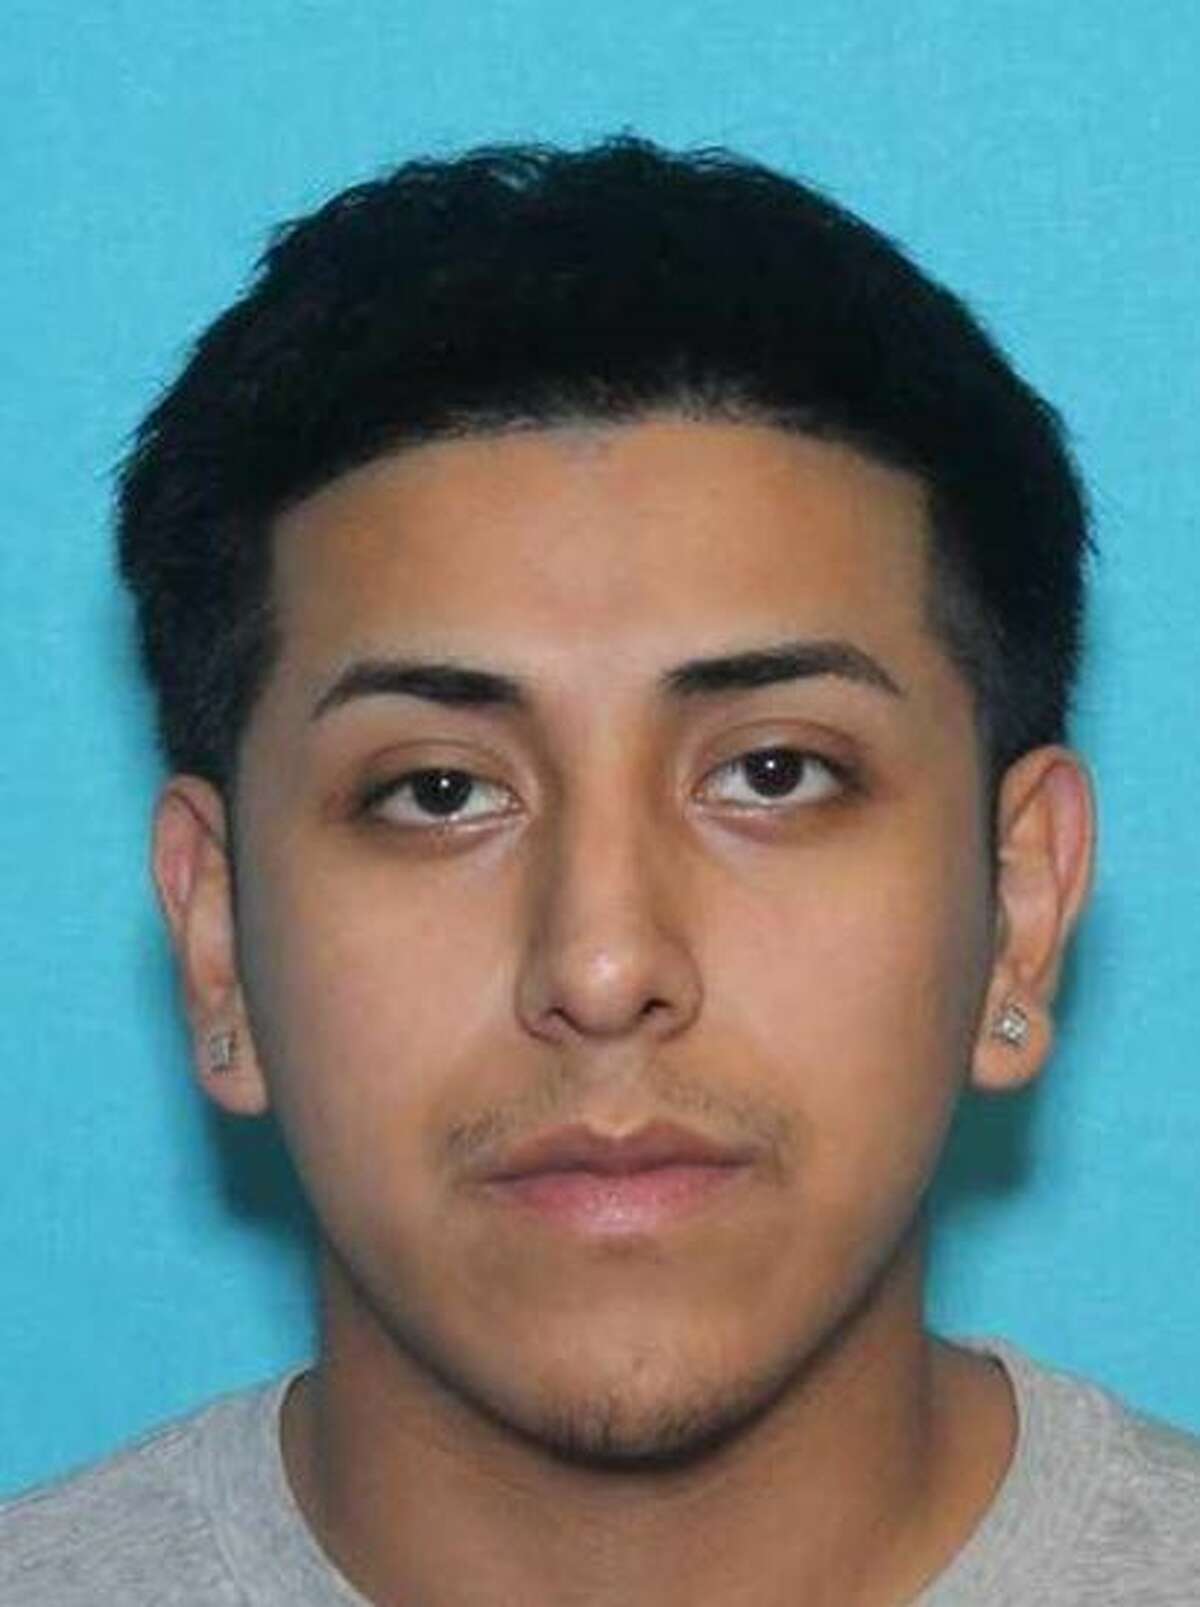 Jonathan Andrew Perales, 18, faces a charge of capital murder. He is being treated at San Antonio Military Medical Center for two gunshot wounds.